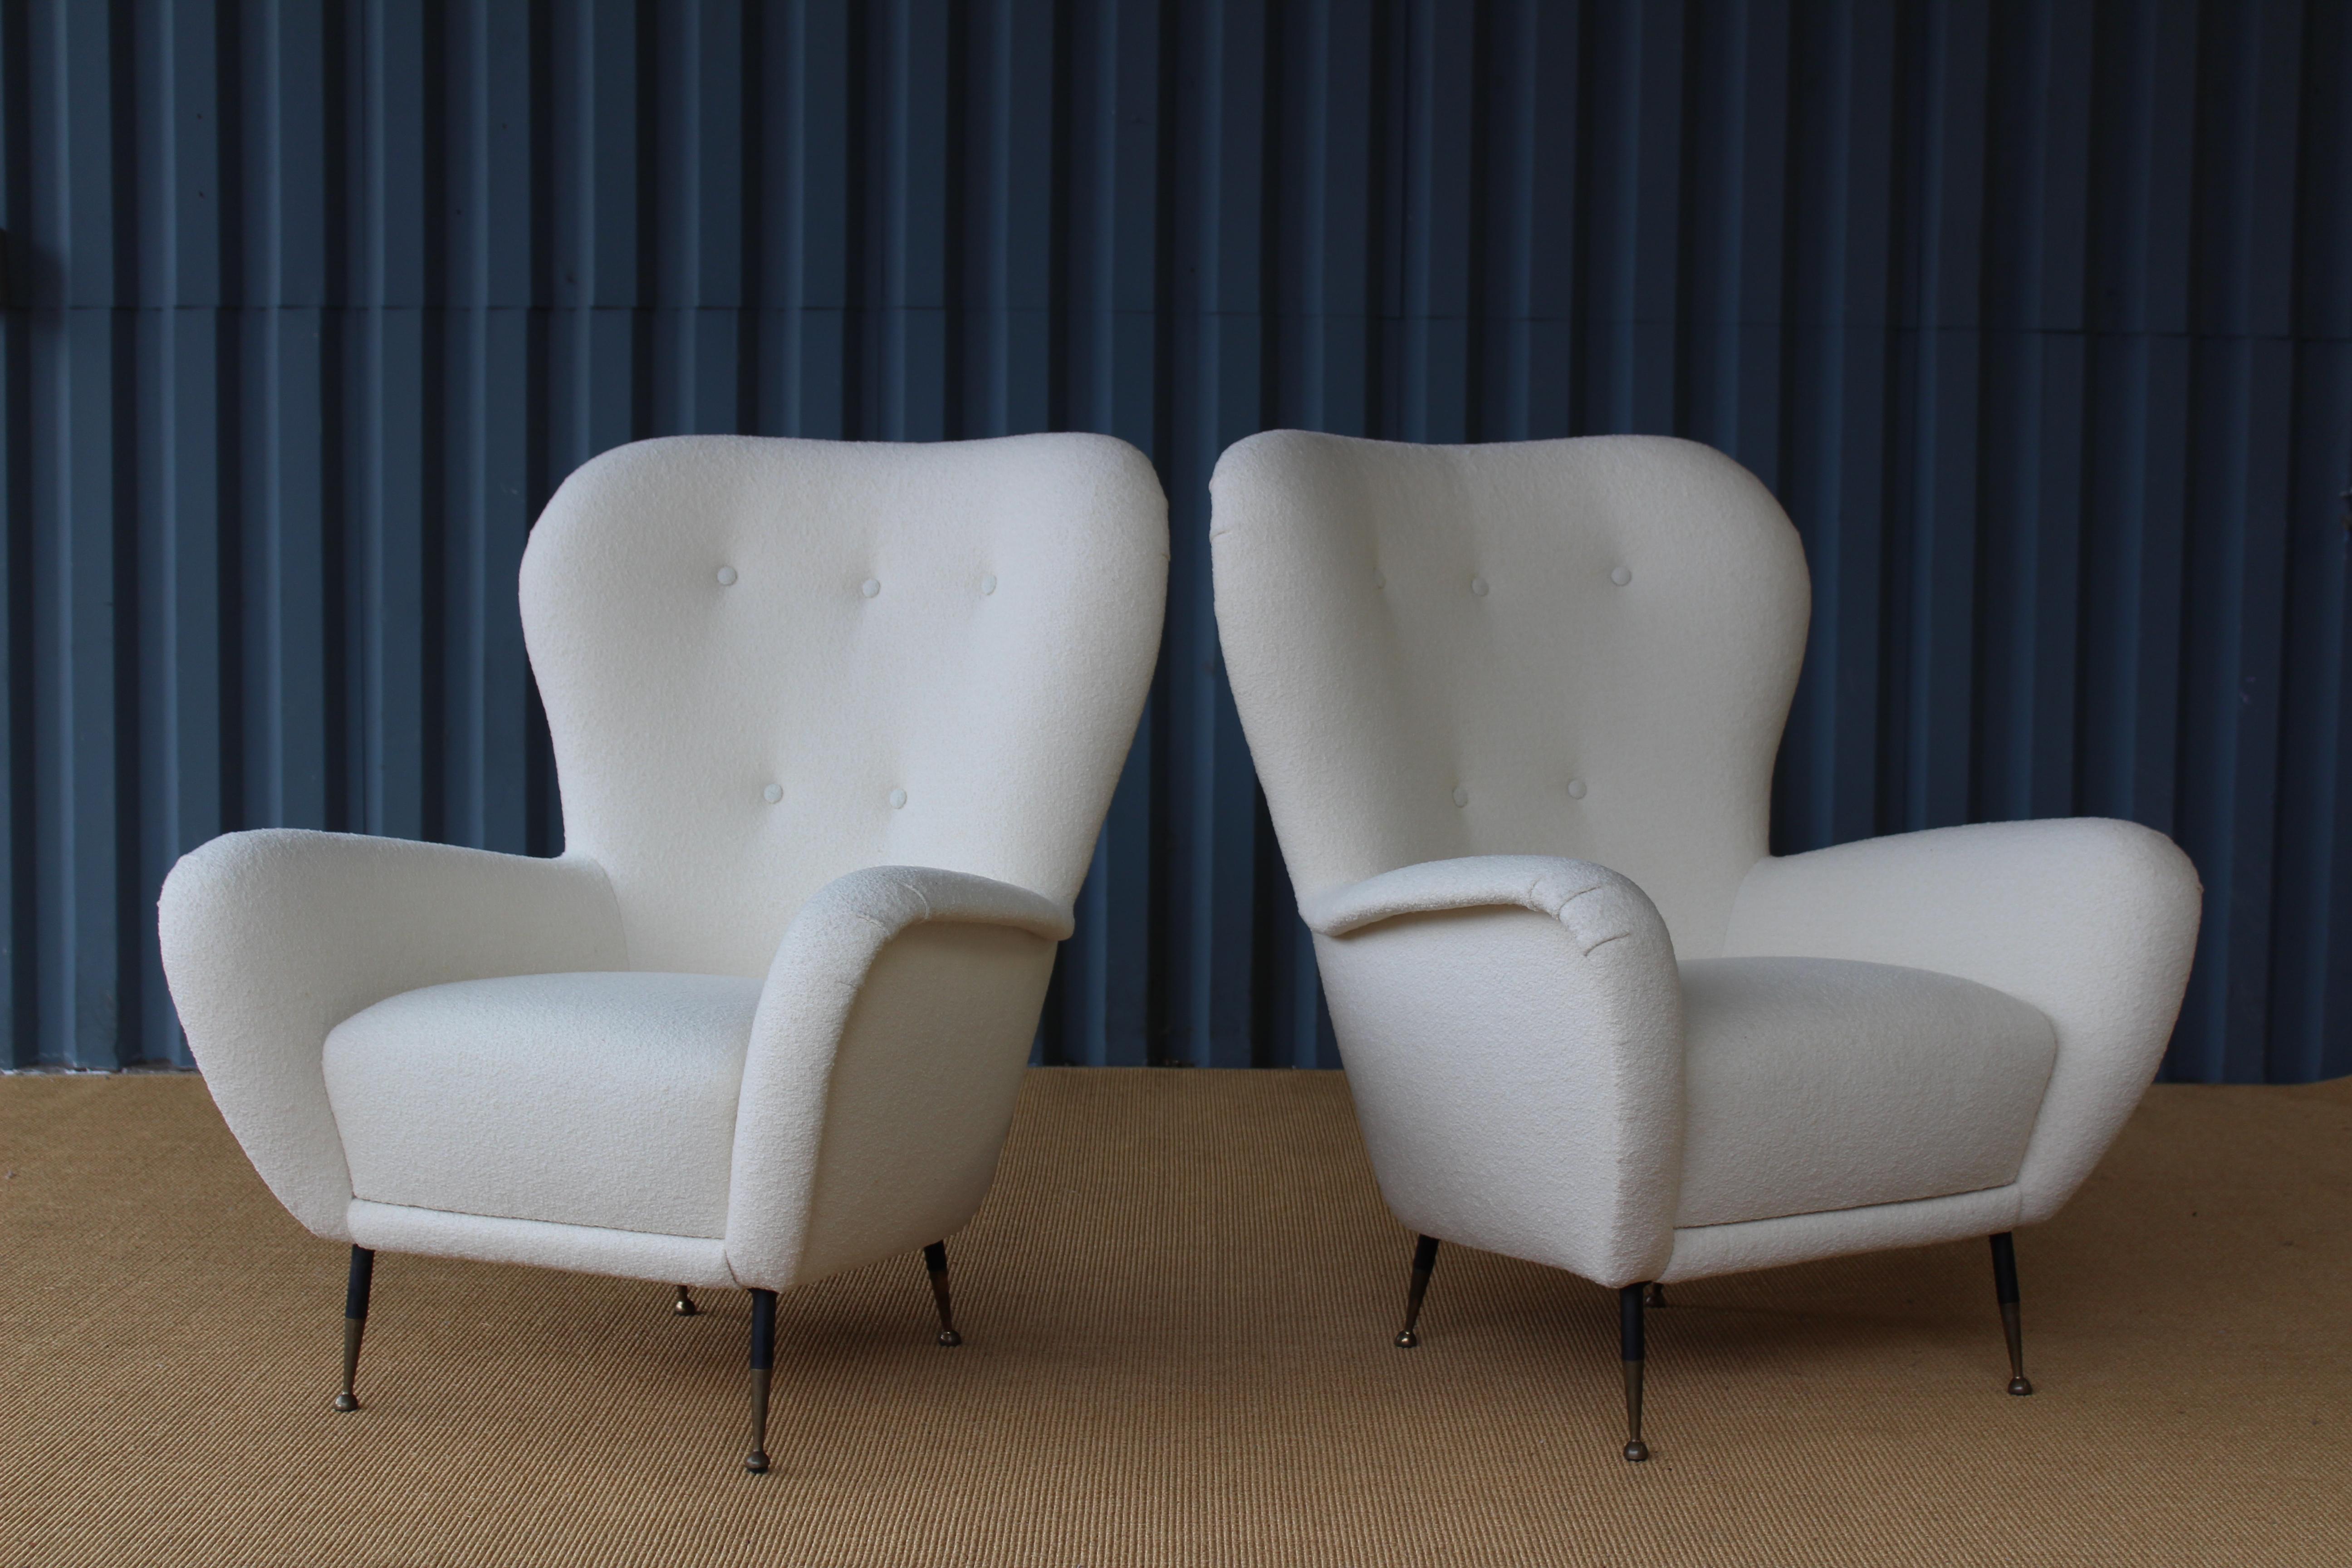 Pair of midcentury 1950s Italian armchairs. They sit on metal bases with brass feet. The pair feature new foam and have been reupholstered in a beautiful bouclé by Knoll.